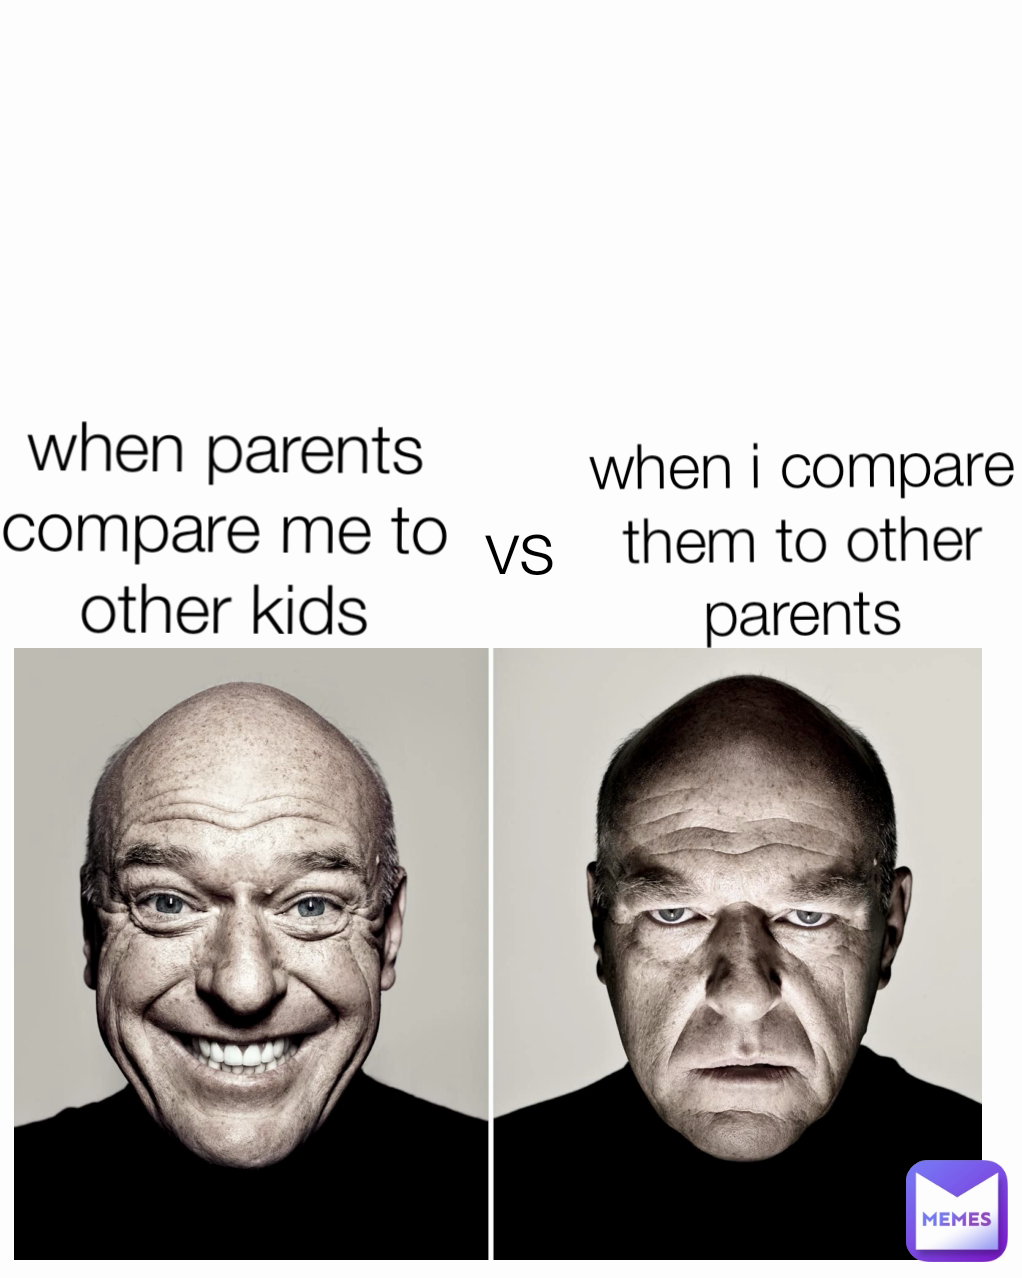 when i compare them to other parents vs when parents compare me to other kids